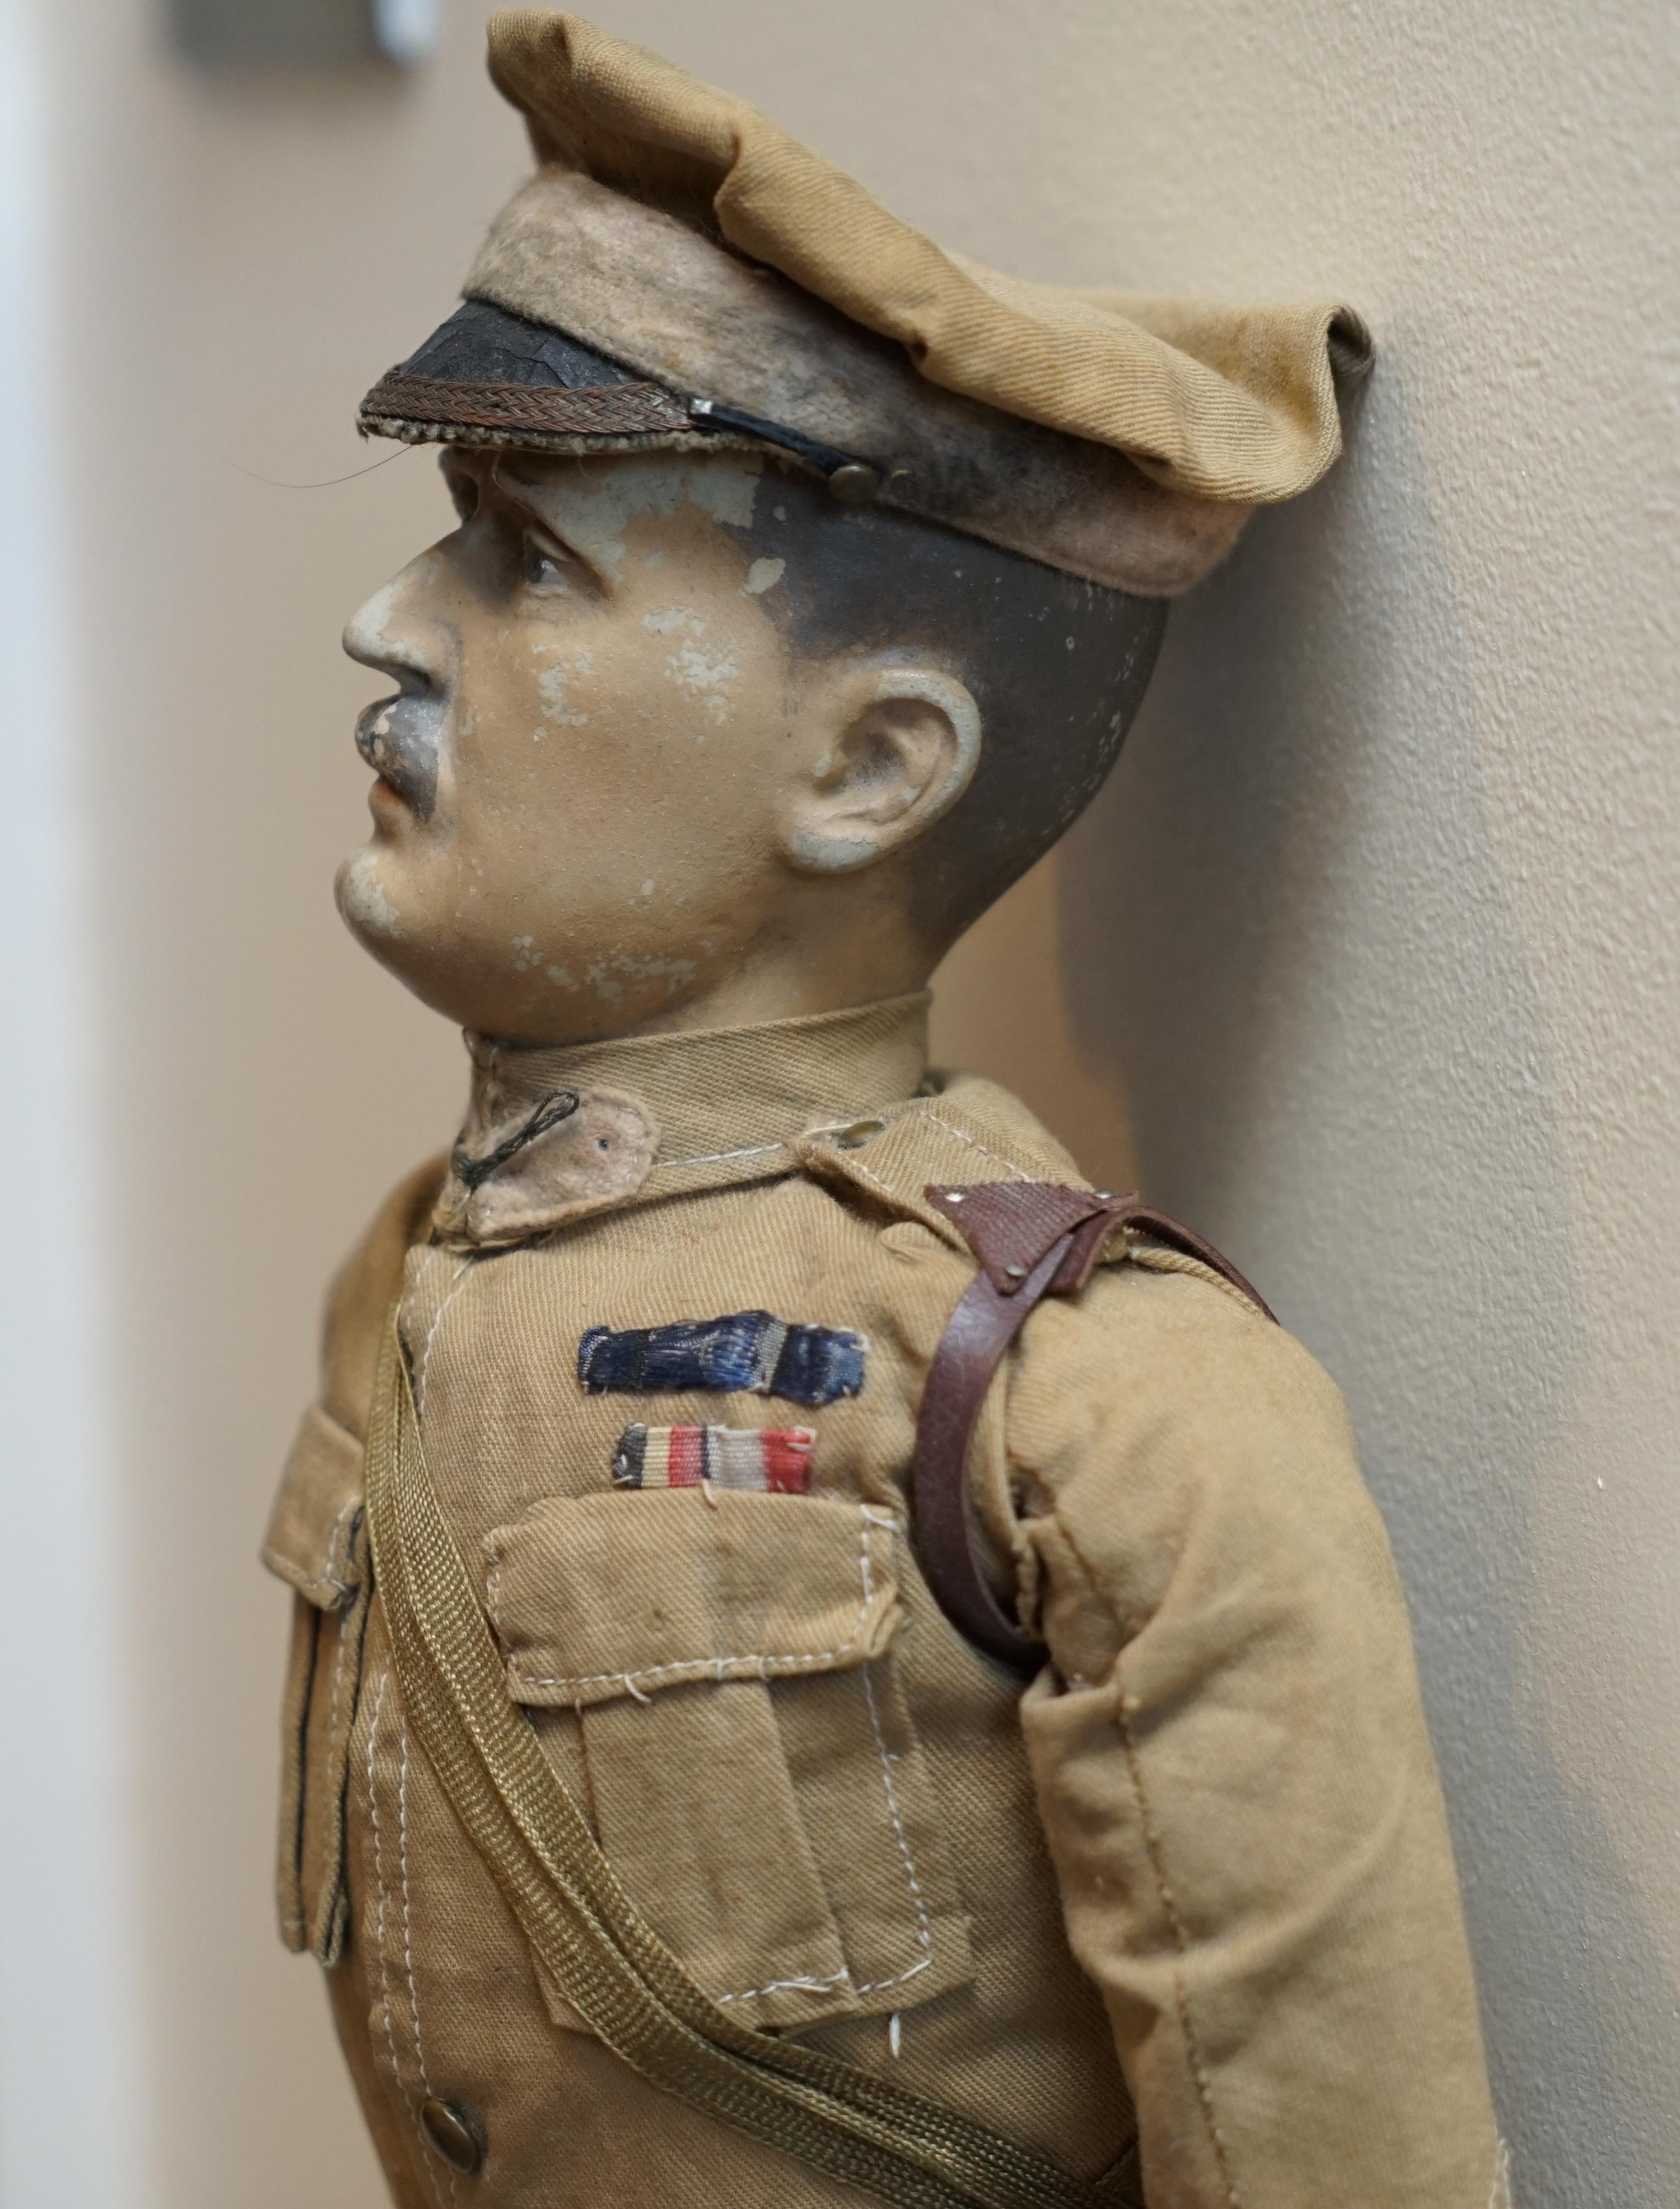 Hand-Crafted Very Rare 1898-1914 British Patriotic Propaganda Doll of Lord Horatio Kitchener For Sale